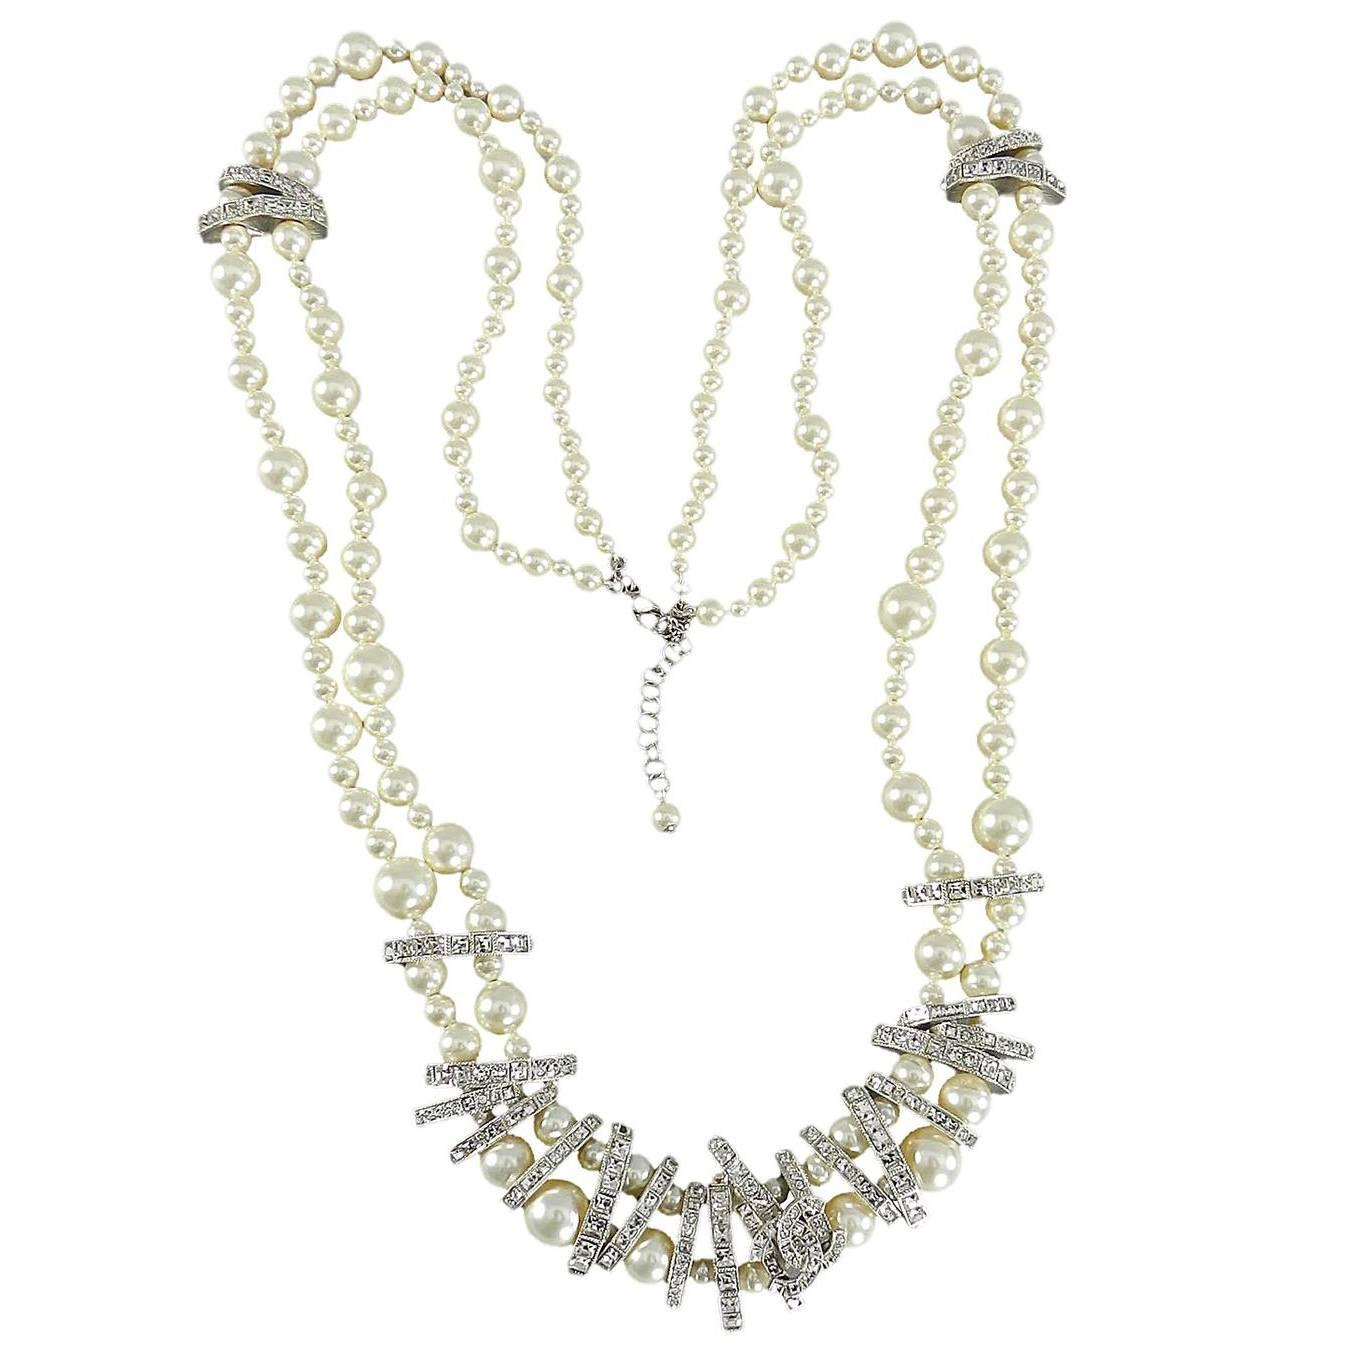 Chanel 15P Long Double Strand Pearl Necklace with Rhinestones